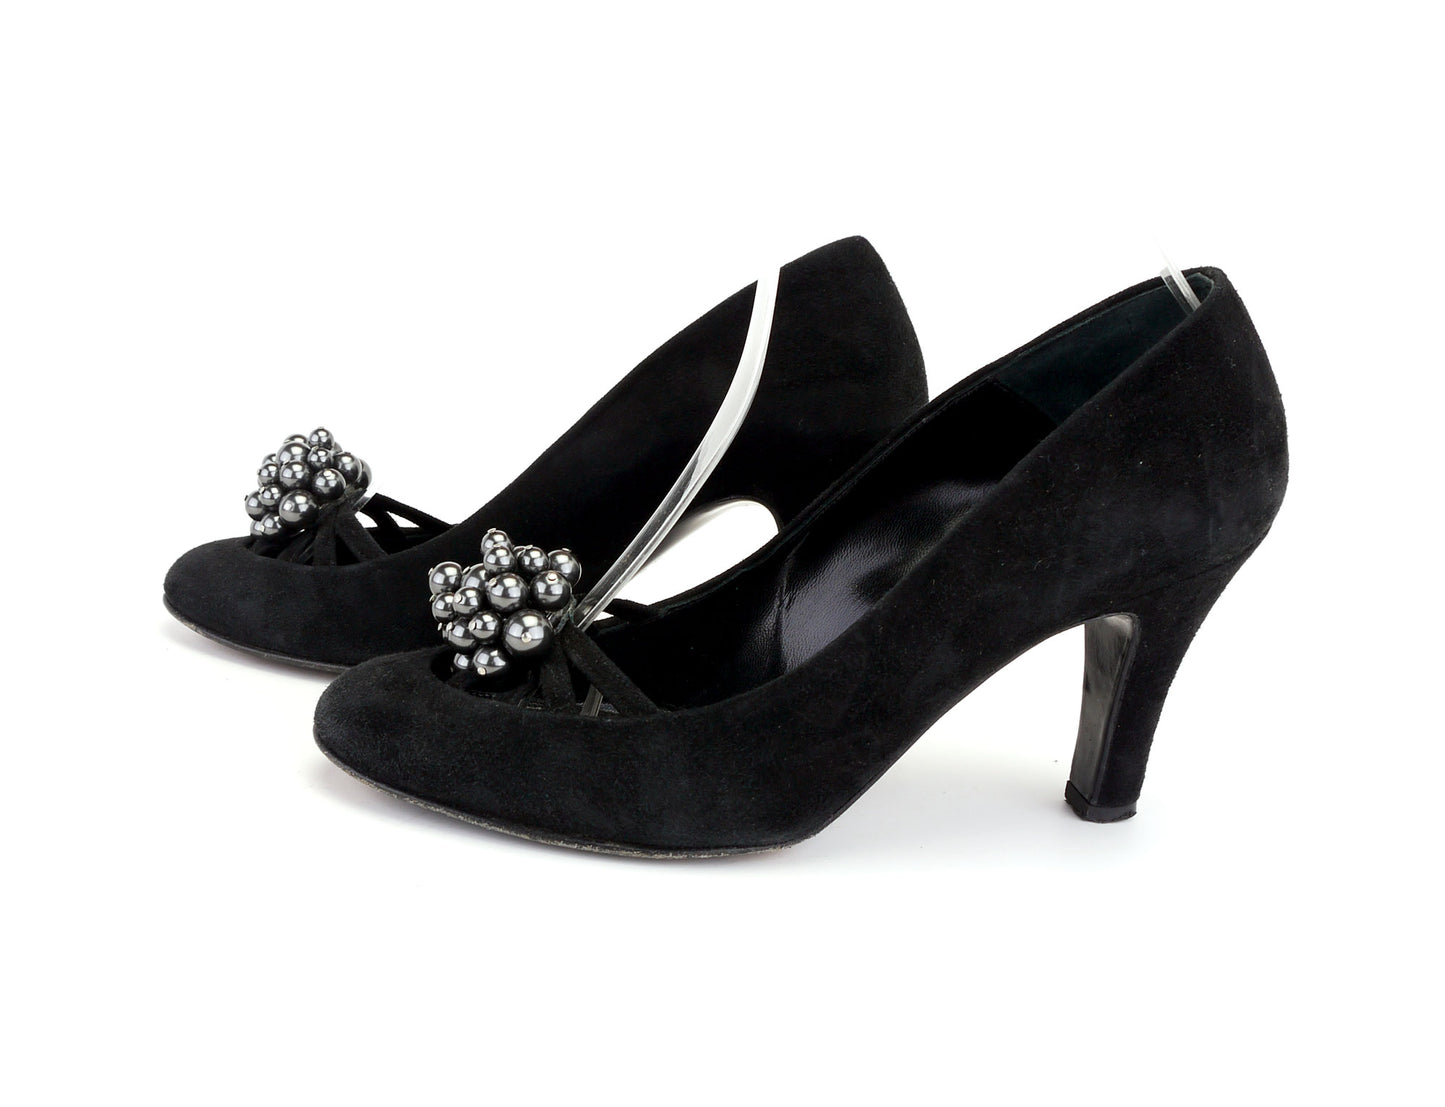 Bally Black Suede 50s Style Pumps w Cherries UK 4